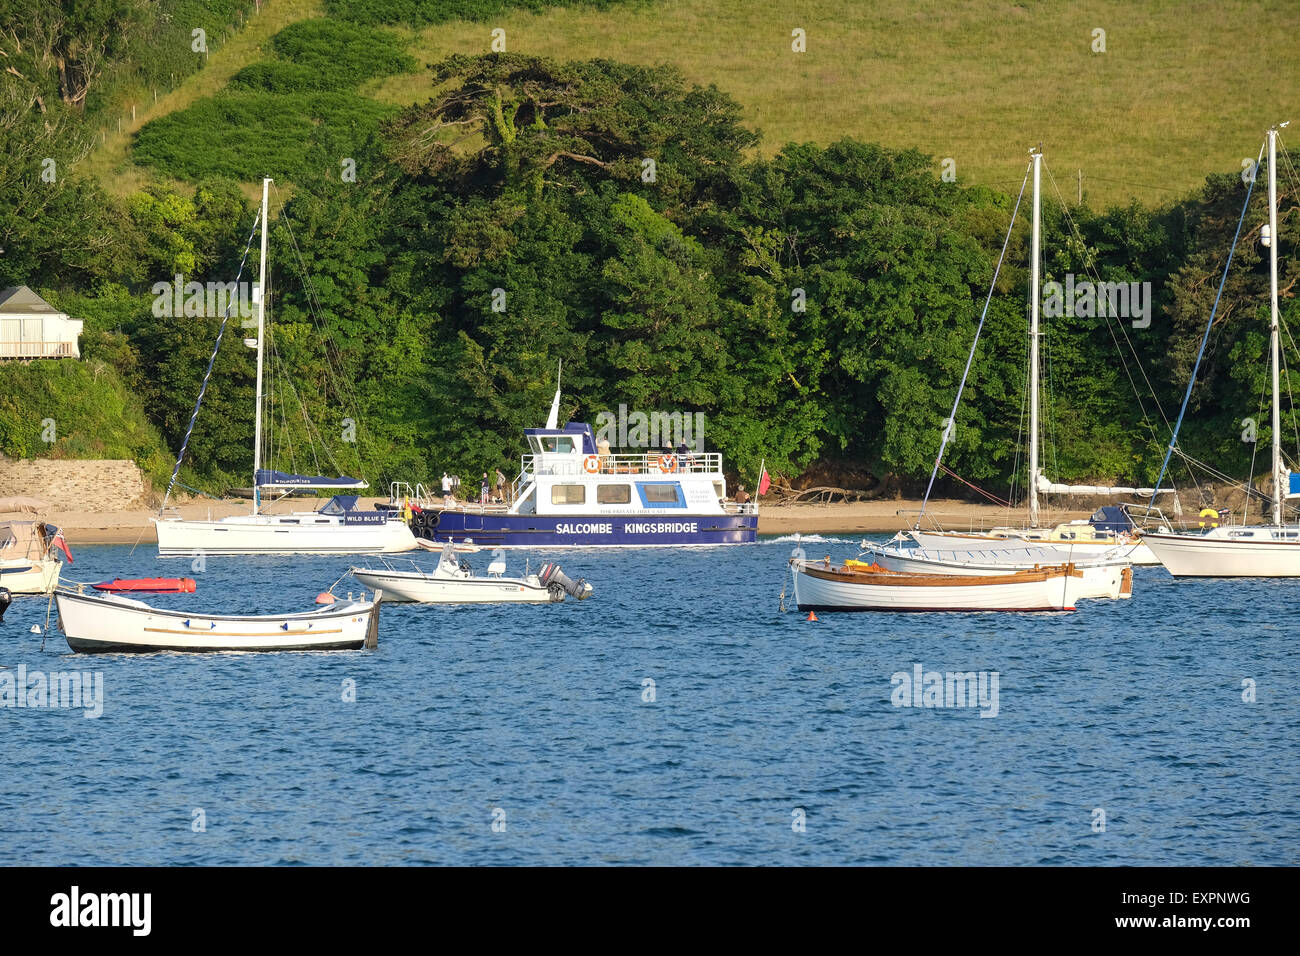 Salcombe, Devon, UK. The Salcombe to Kingsbridge Ferry navigating through the many boats anchored in the water at Salcombe. Stock Photo